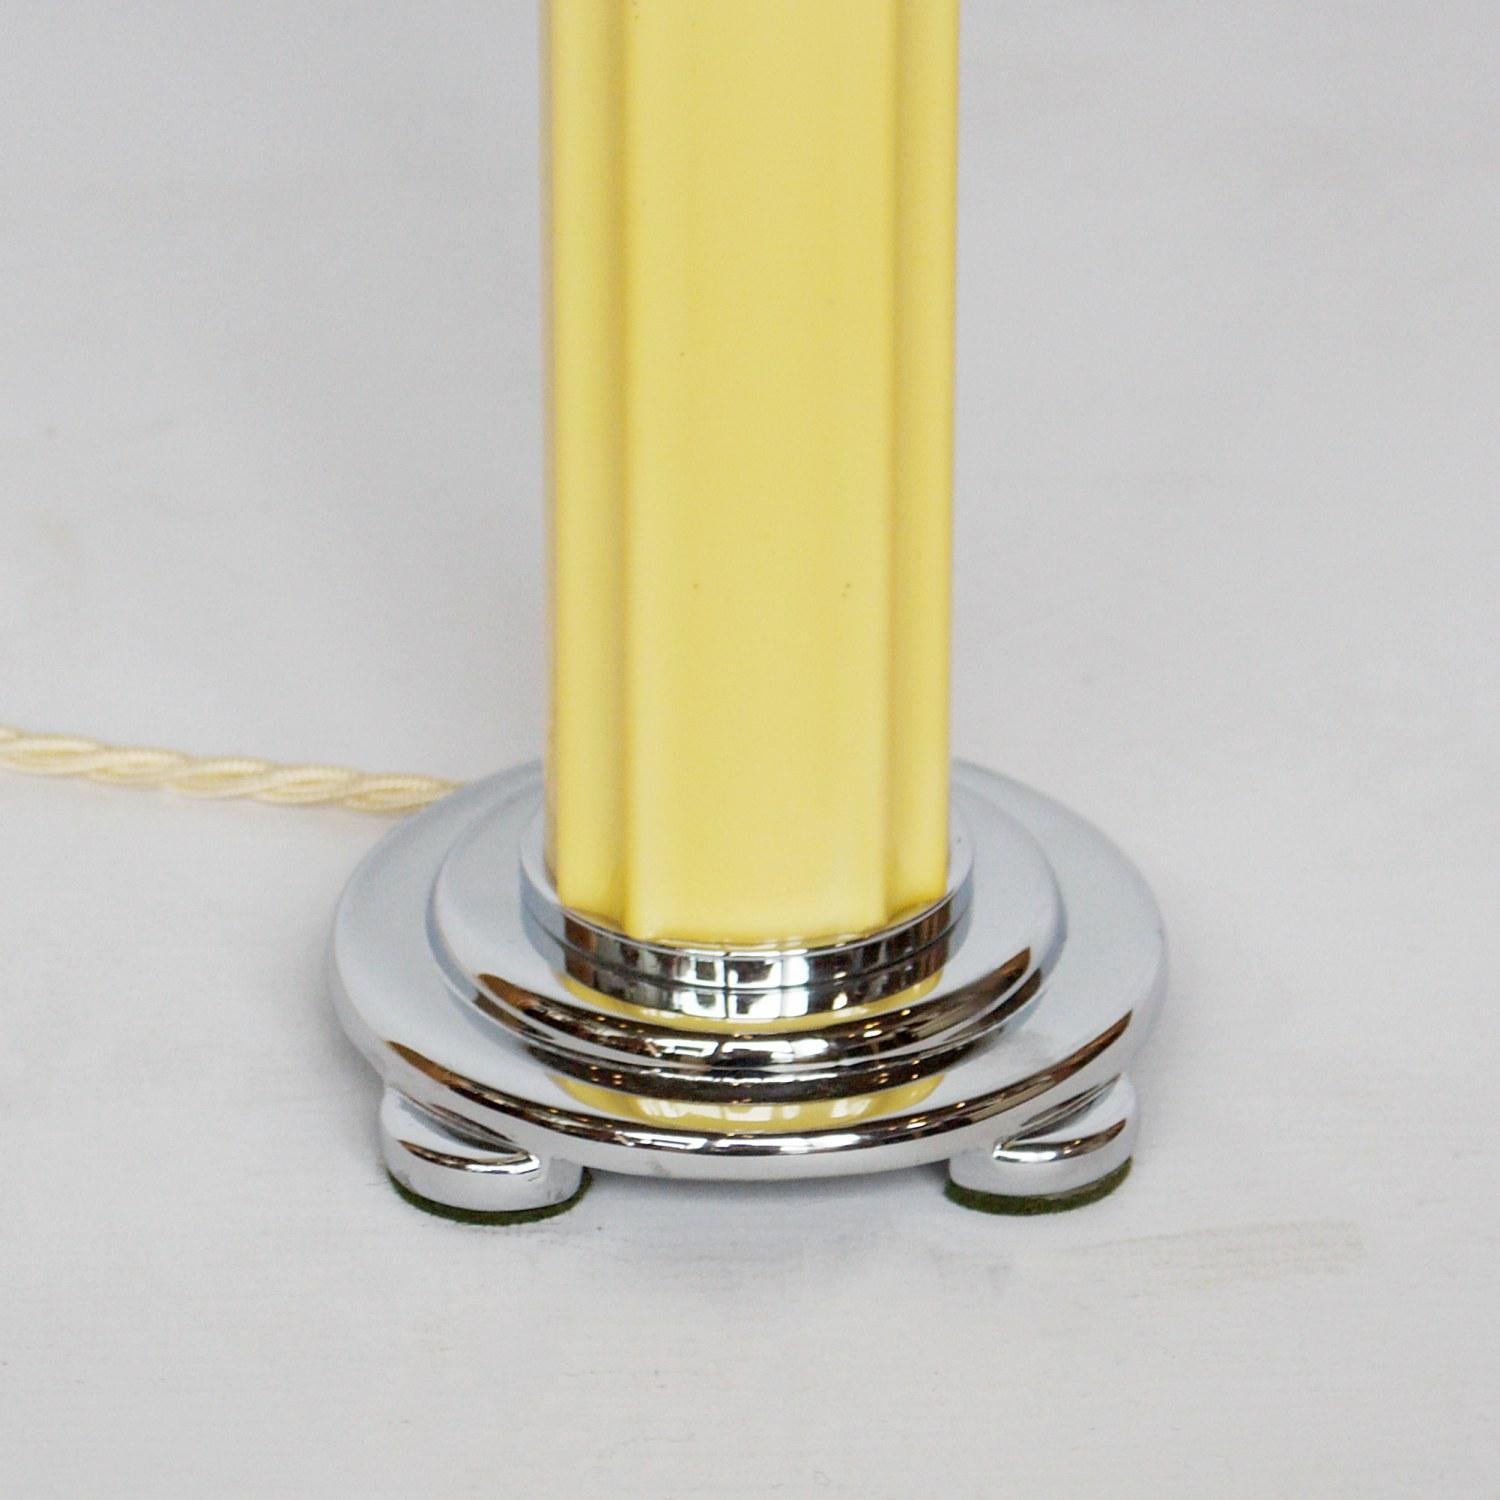 An Art Deco style table lamp with star decorated yellow glass and chromed metal shade over a reeded yellow bakelite stem. 

Dimensions: H 43cm W 16cm D 12cm 

Origin: English

Item Number: 1106204

All of our lighting is fully refurbished,